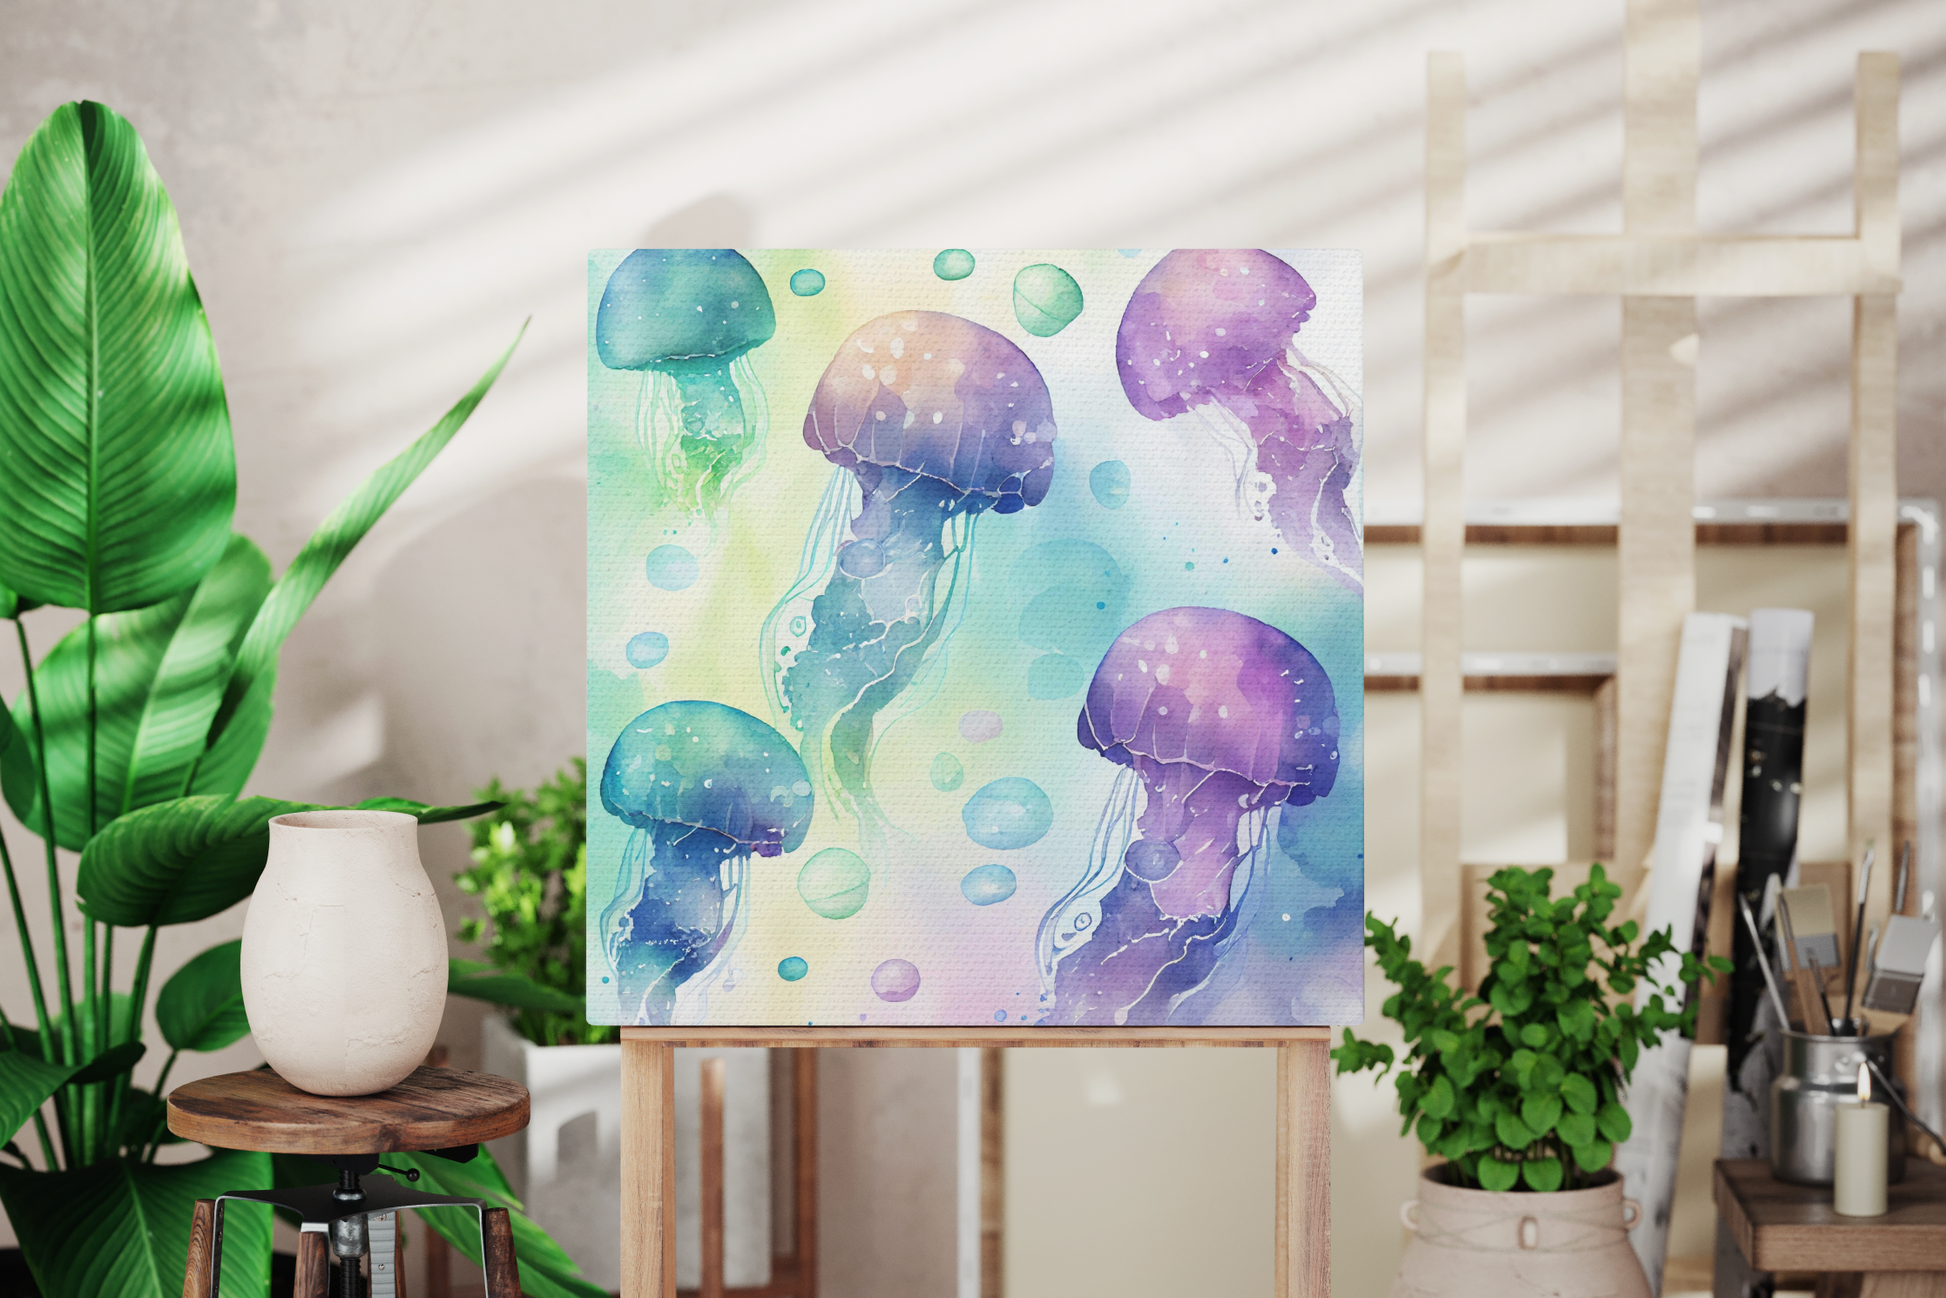 purple and green jellyfish canvas wall art, blue ocean jellyfish canvas with watercolor design, purple watercolor jellyfish art print on canvas 